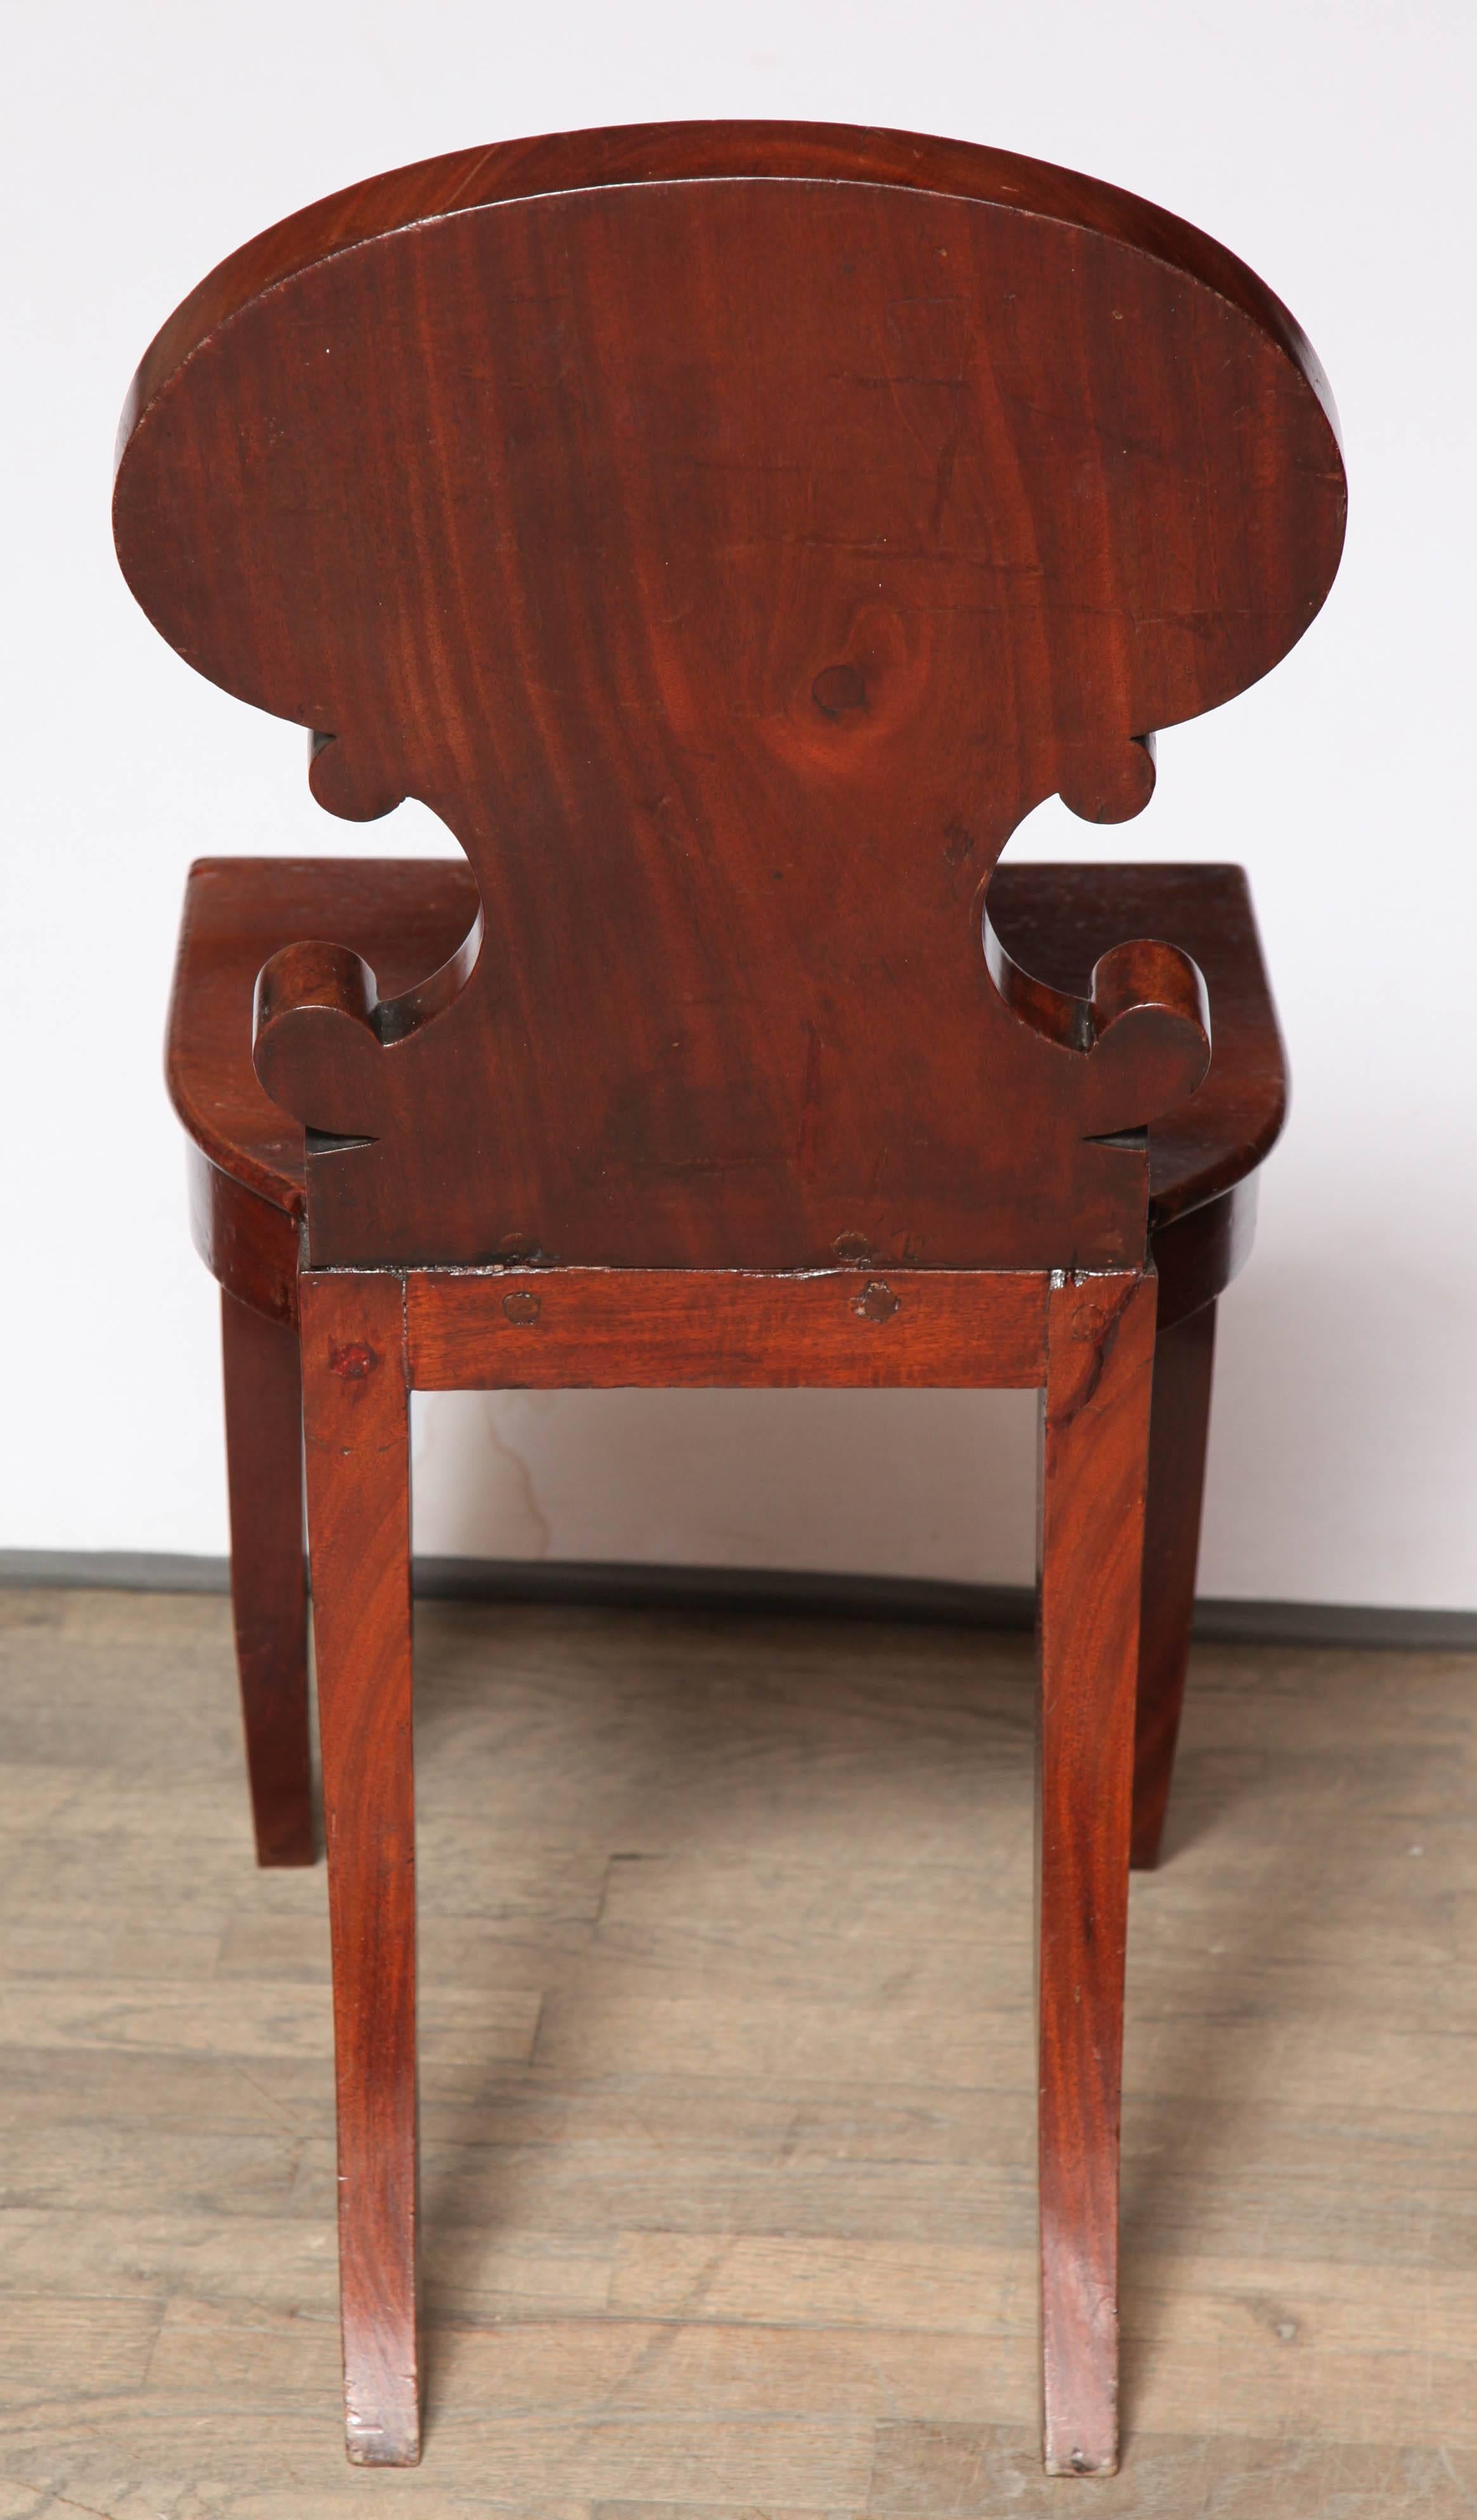 19th Century Regency Hall Chair by Gillows of Lancaster